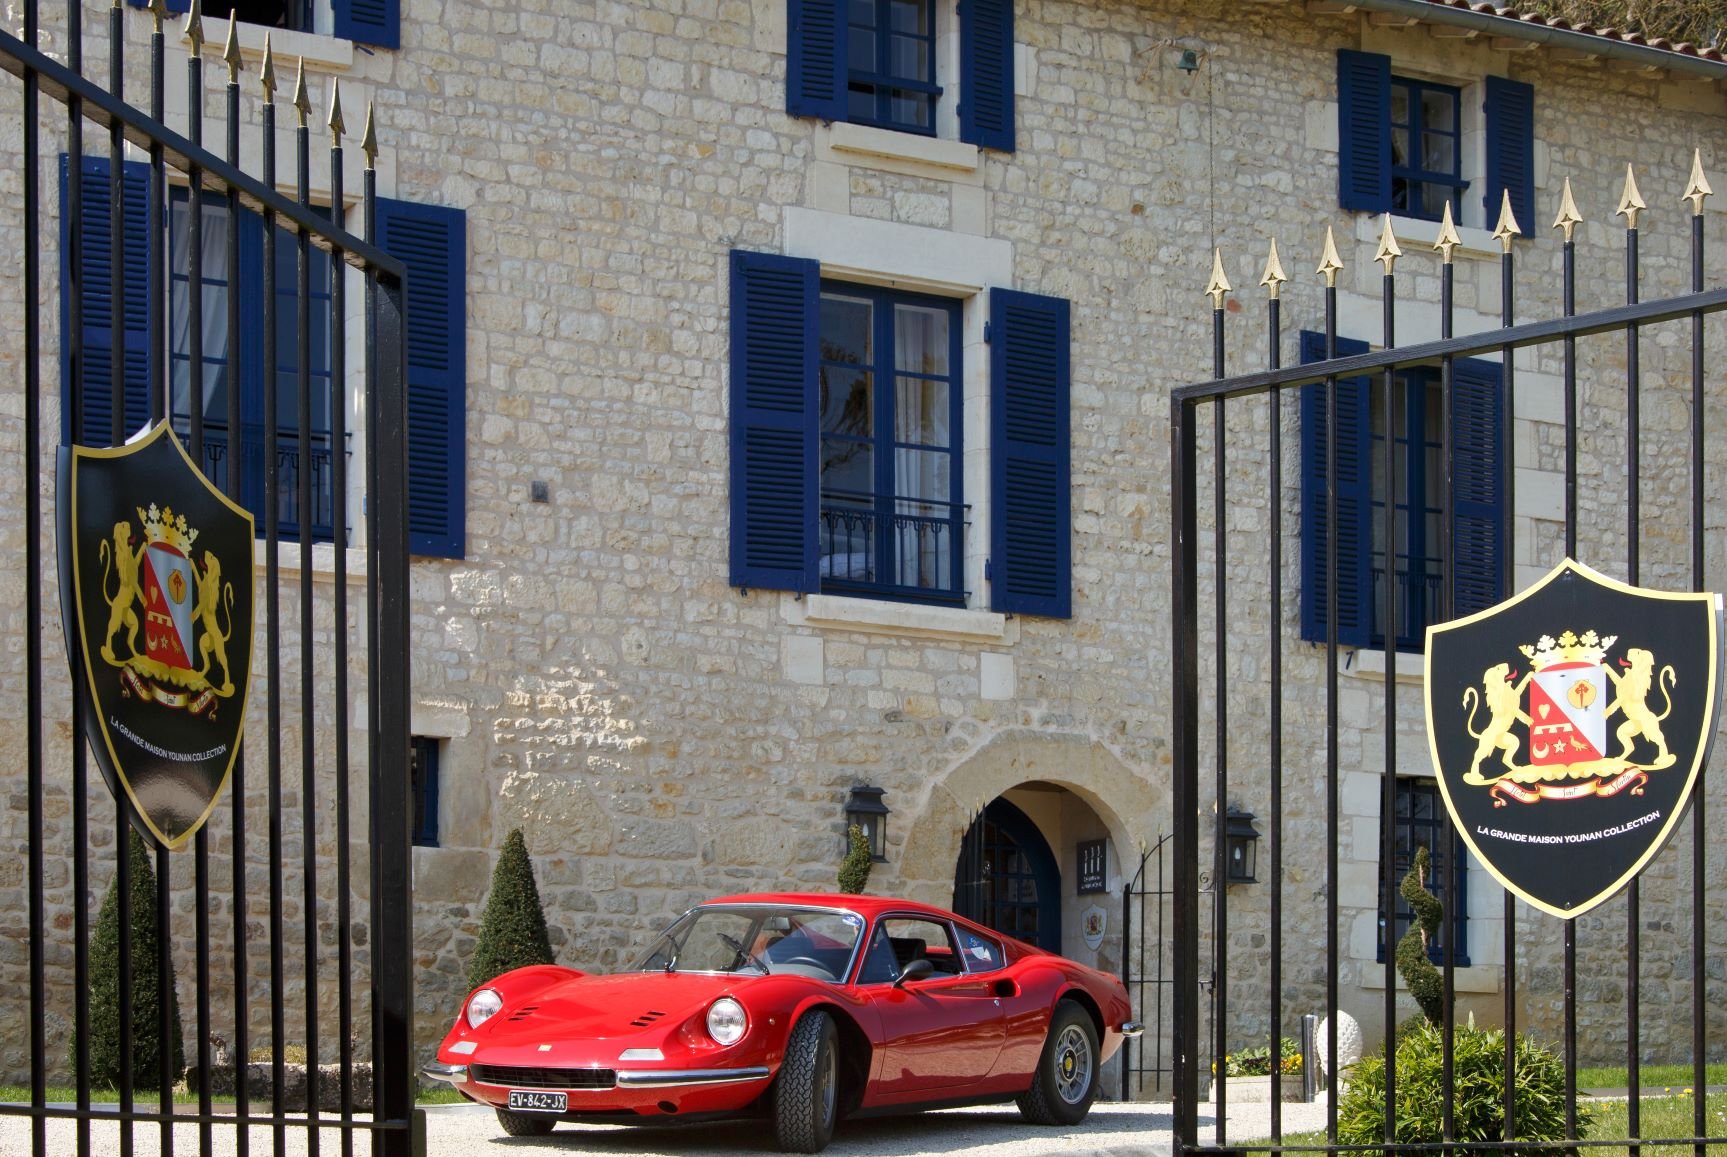 Hôtel Saint-Martin | In Nouvelle Aquitaine, 20 minutes from Niort, France | Weddings & Events